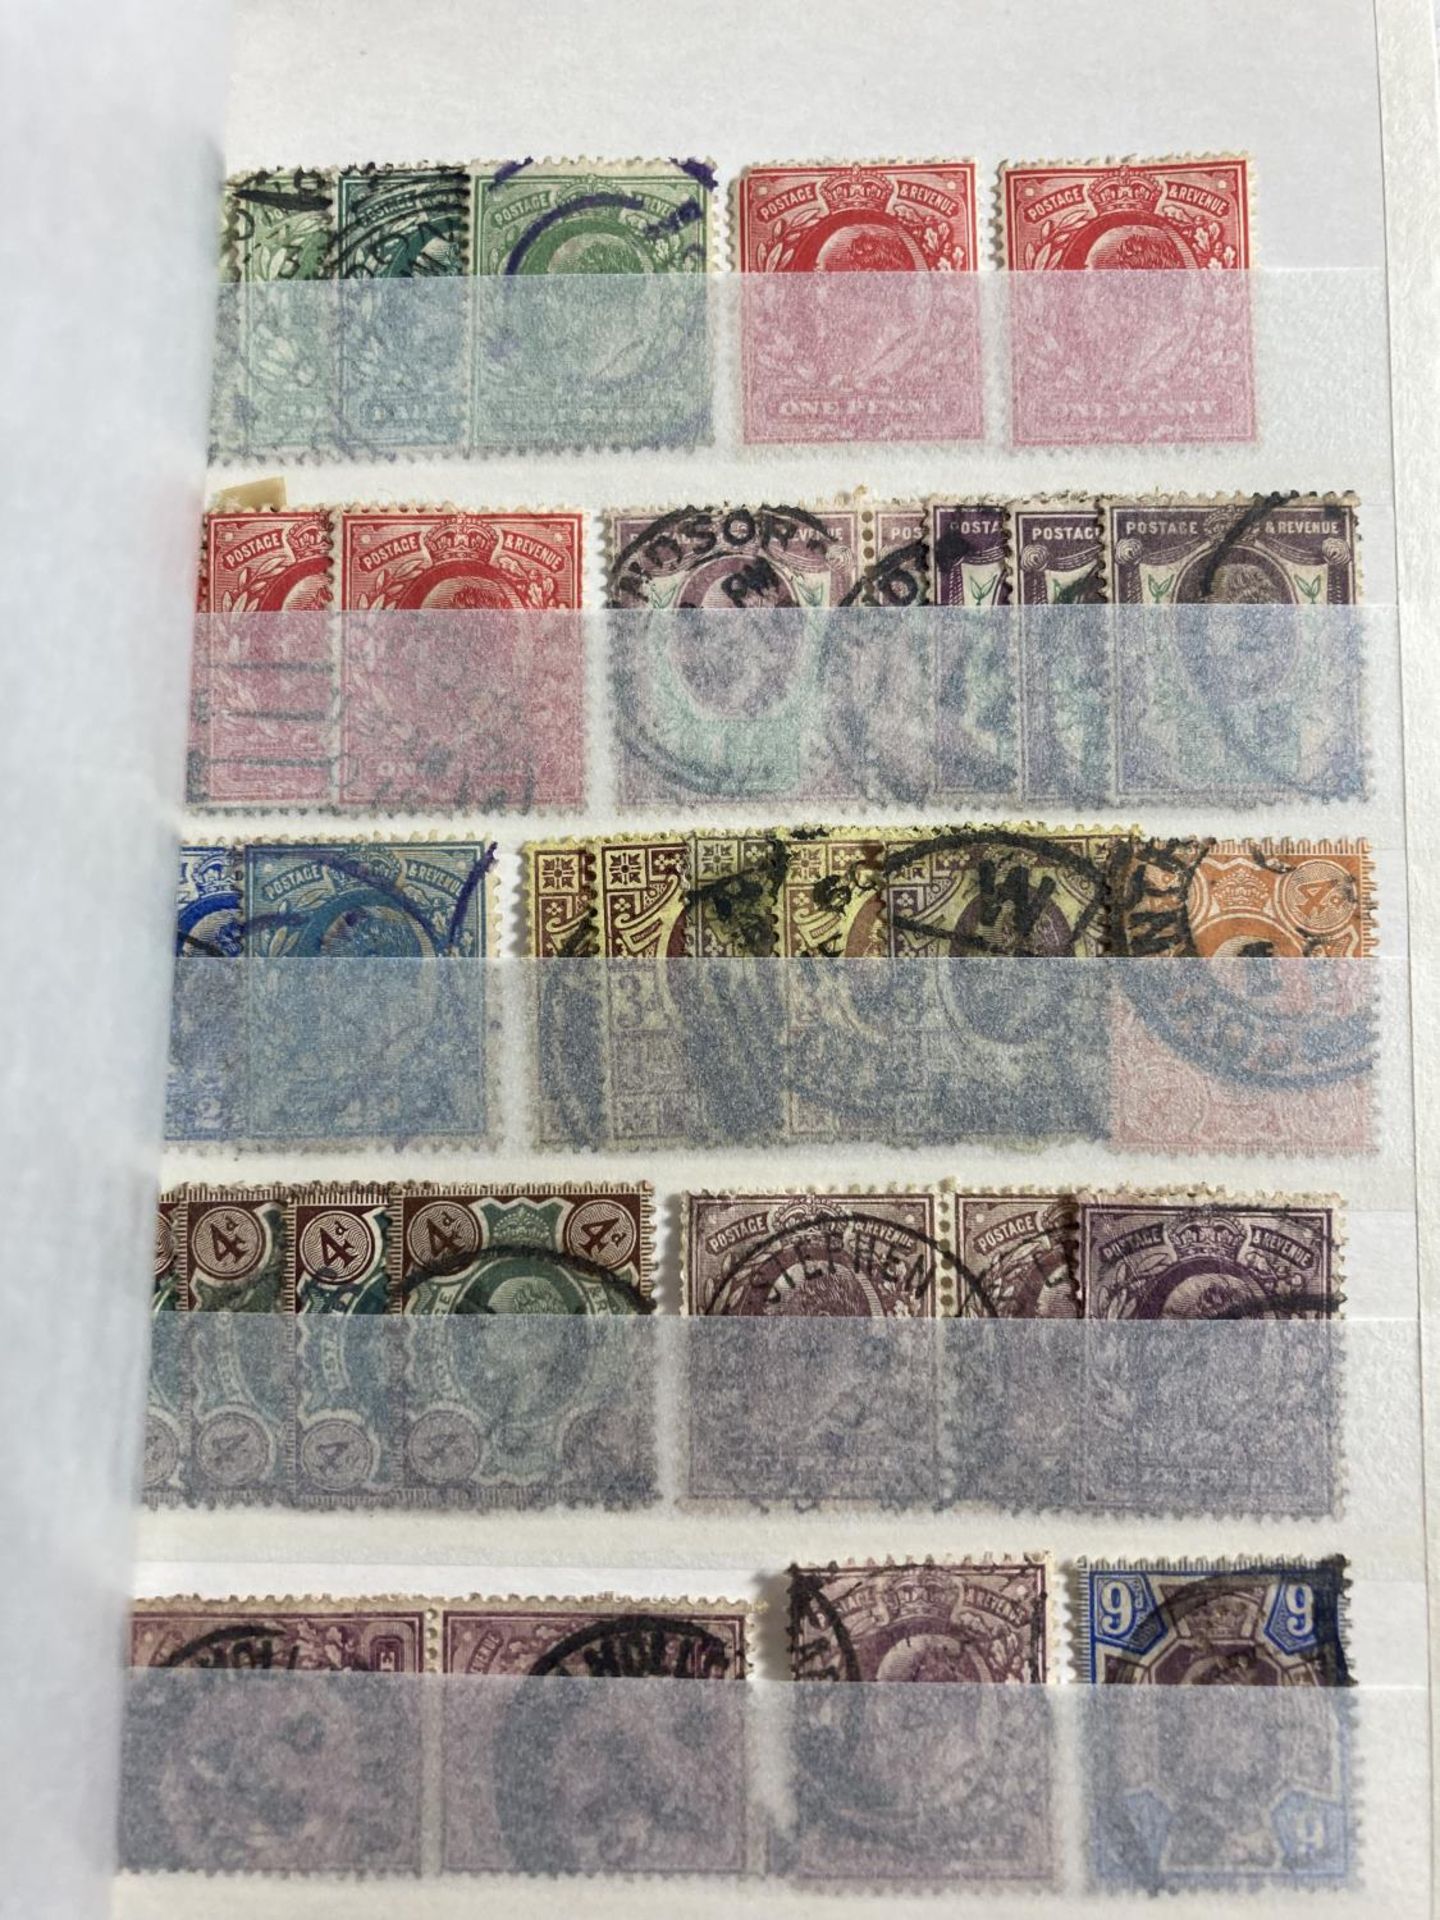 SMALL RED STOCK BOOK CONTAINING GB , QV-GV . TWO 1840 2D BLUES ARE PRESENT PLUS QV TO 1/- AND EV11 - Image 2 of 4